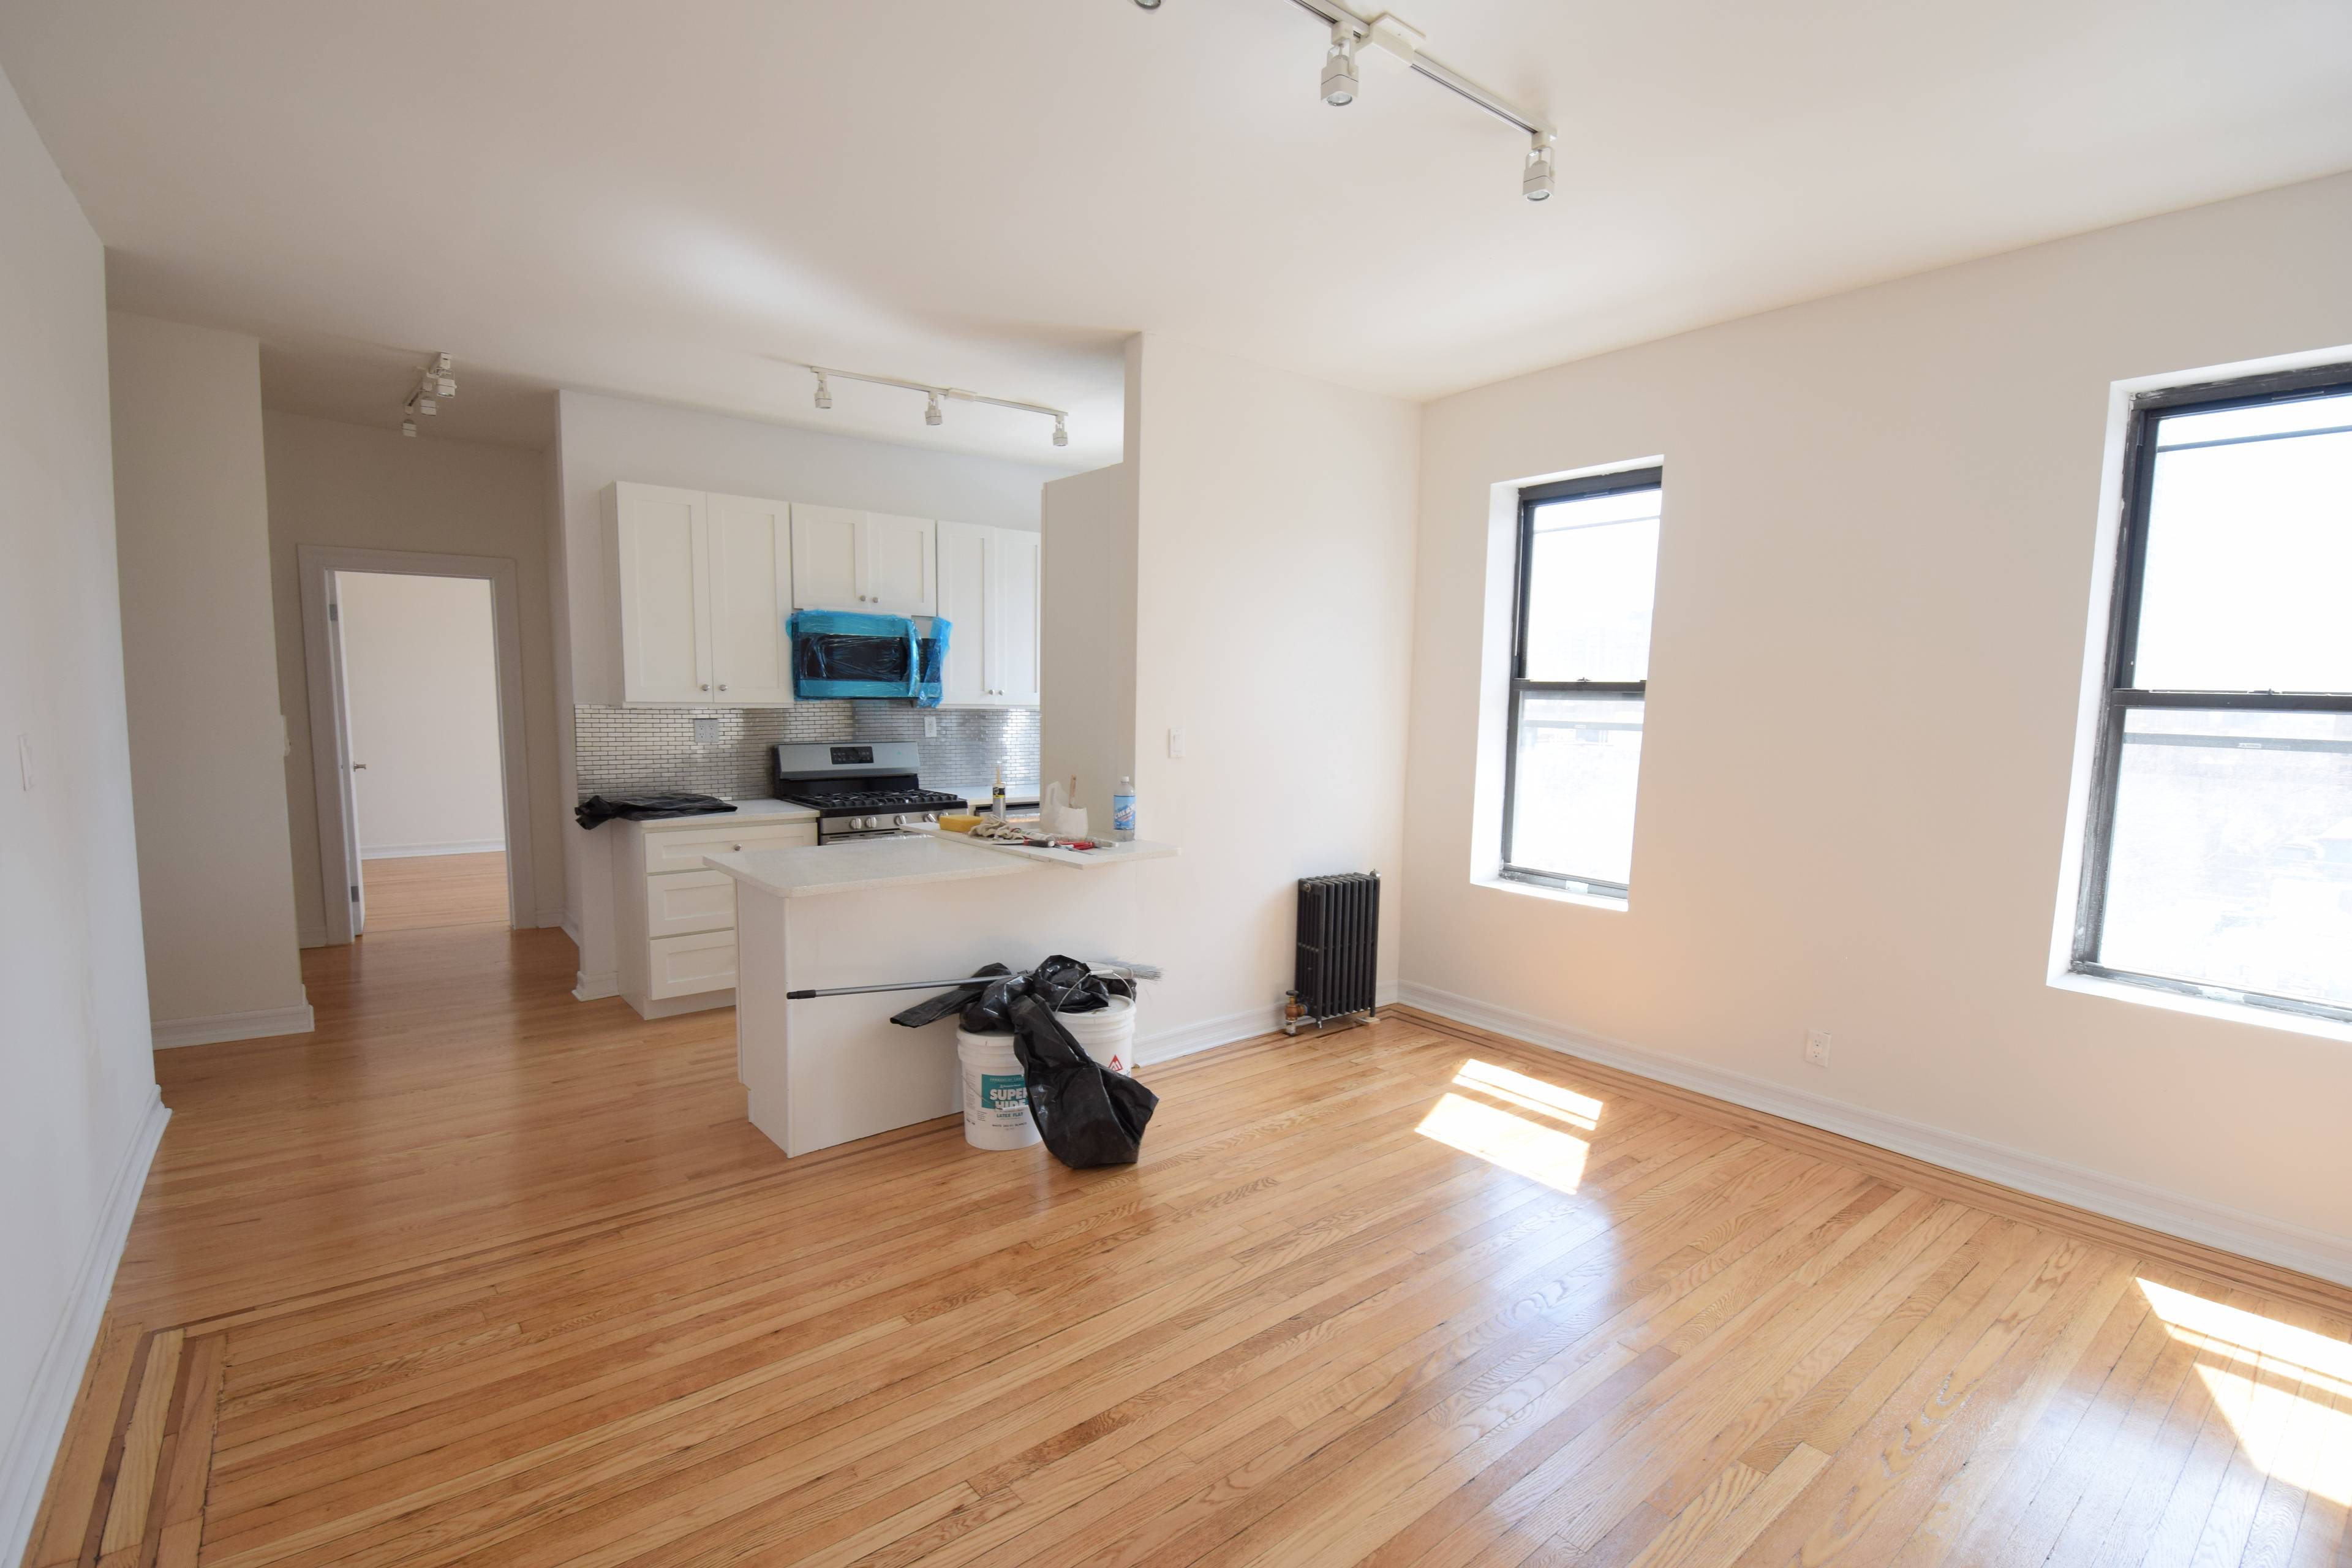 ONE MONTH BROKER FEE ! Beautiful split 2 bedroom with unobstructed views of Brooklyn from the 5th floor of this elevator building.